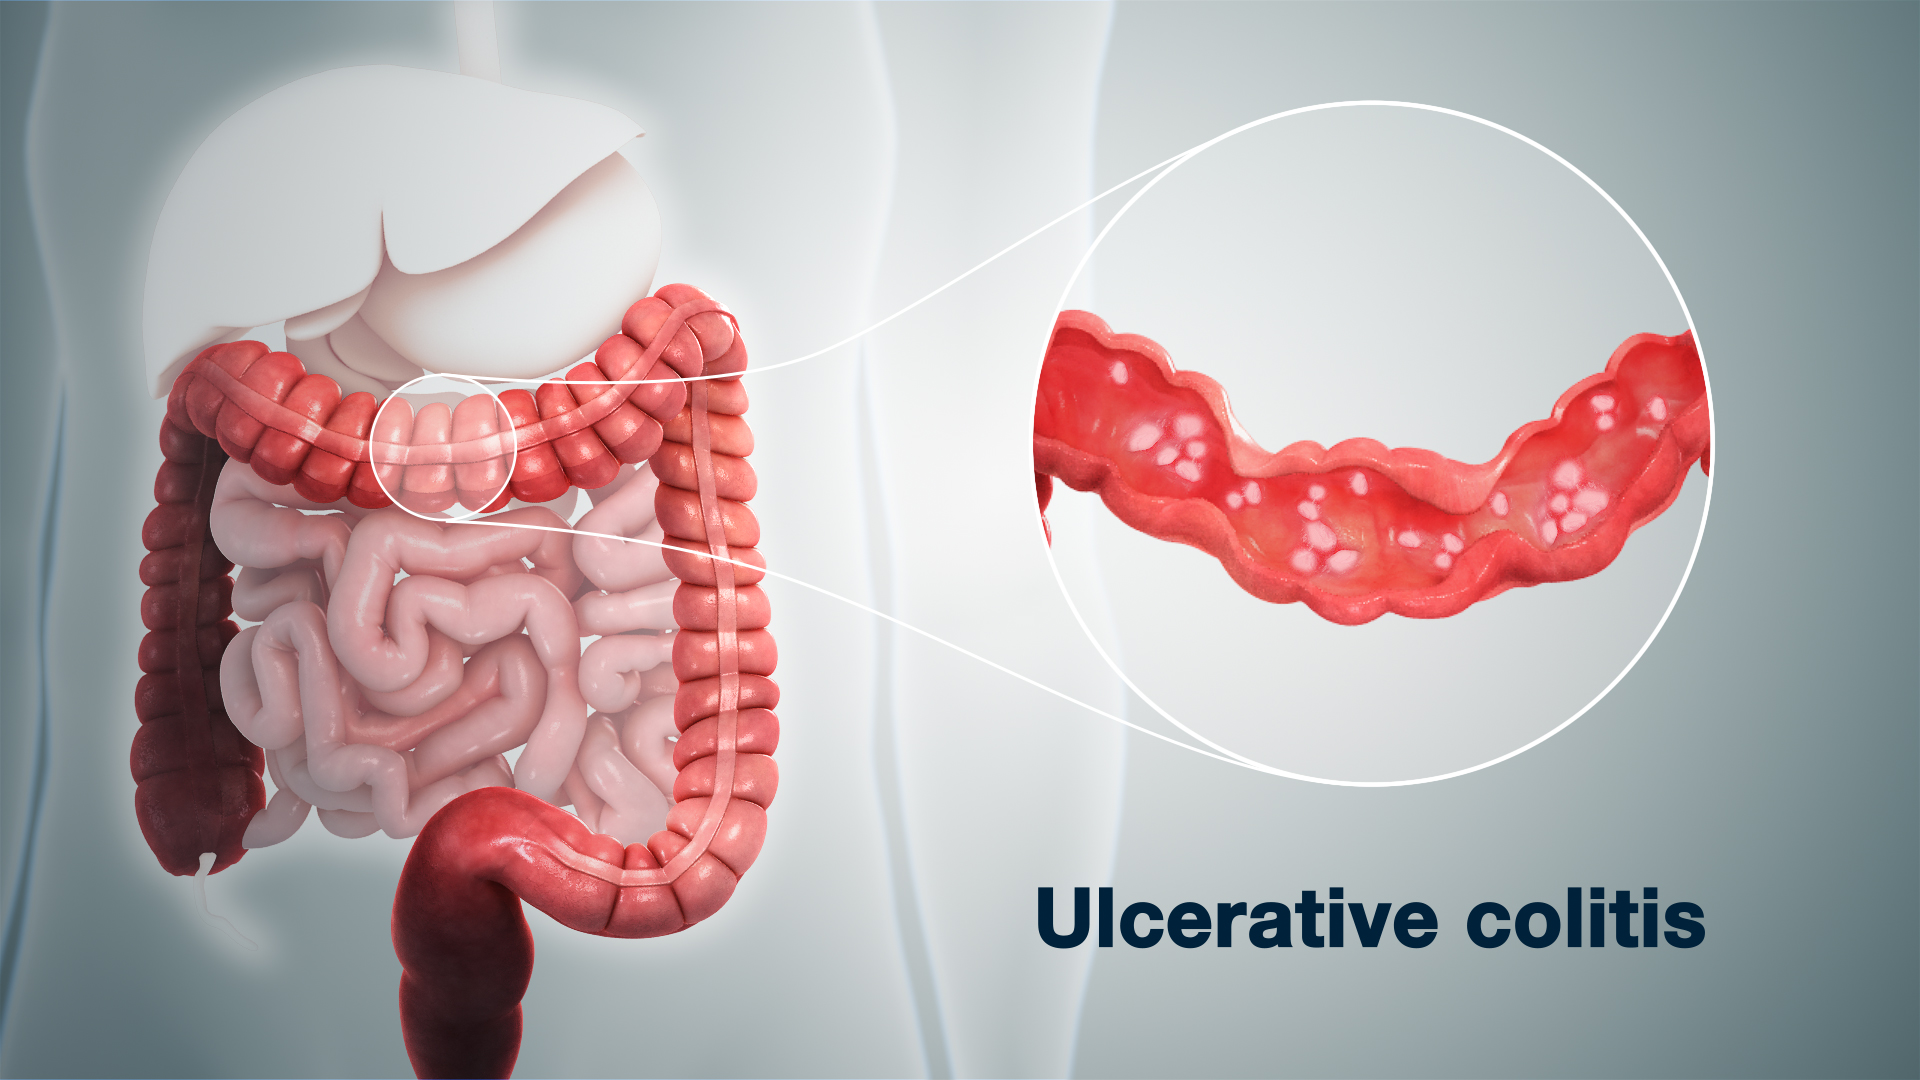 Ulcerative Colitis Causes & Treatment depicted using 3D medical